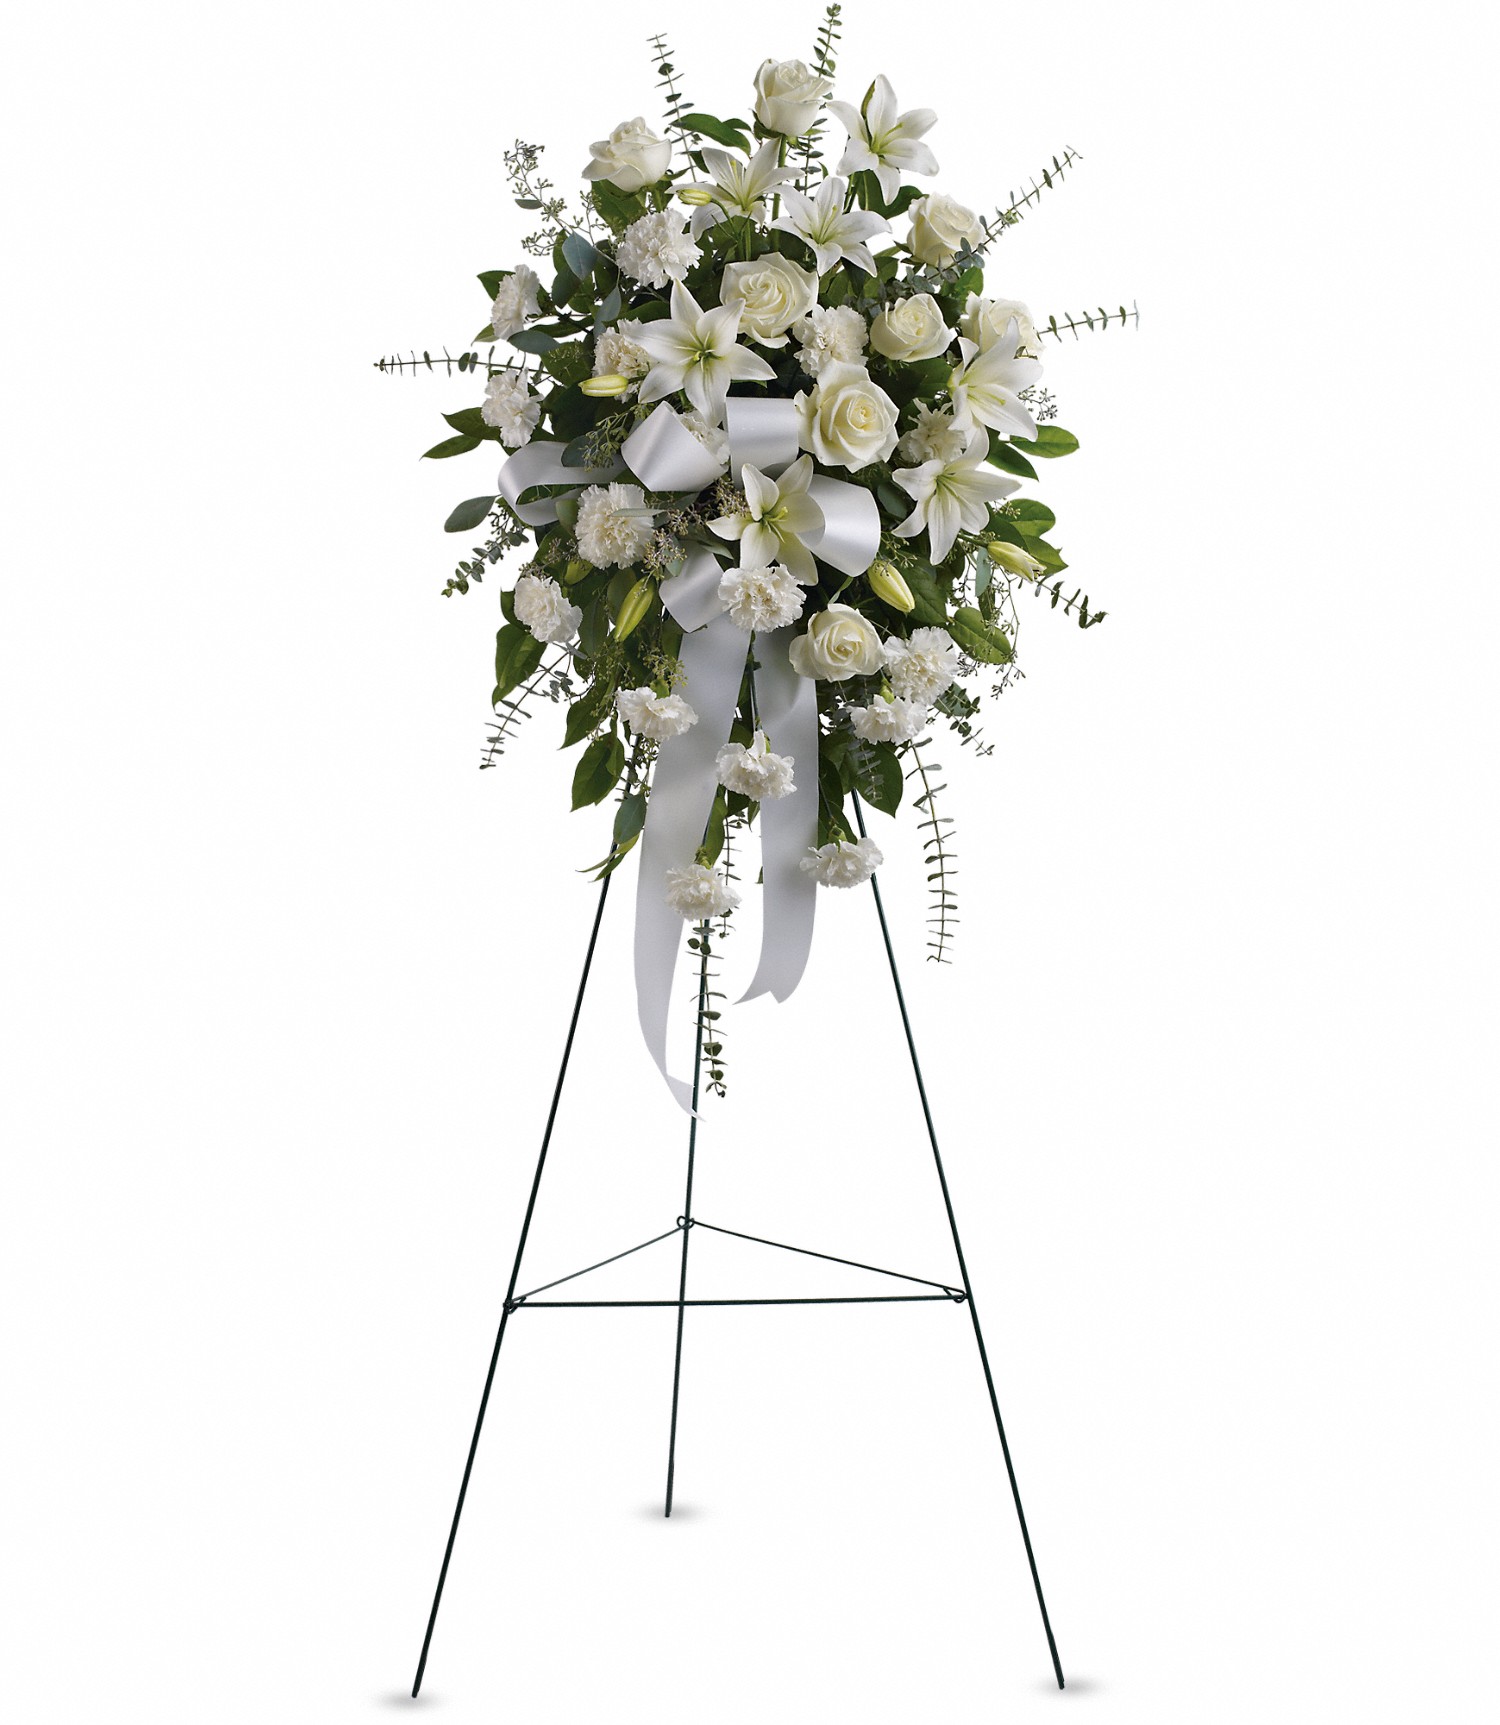 funeral easel stands easel stands for